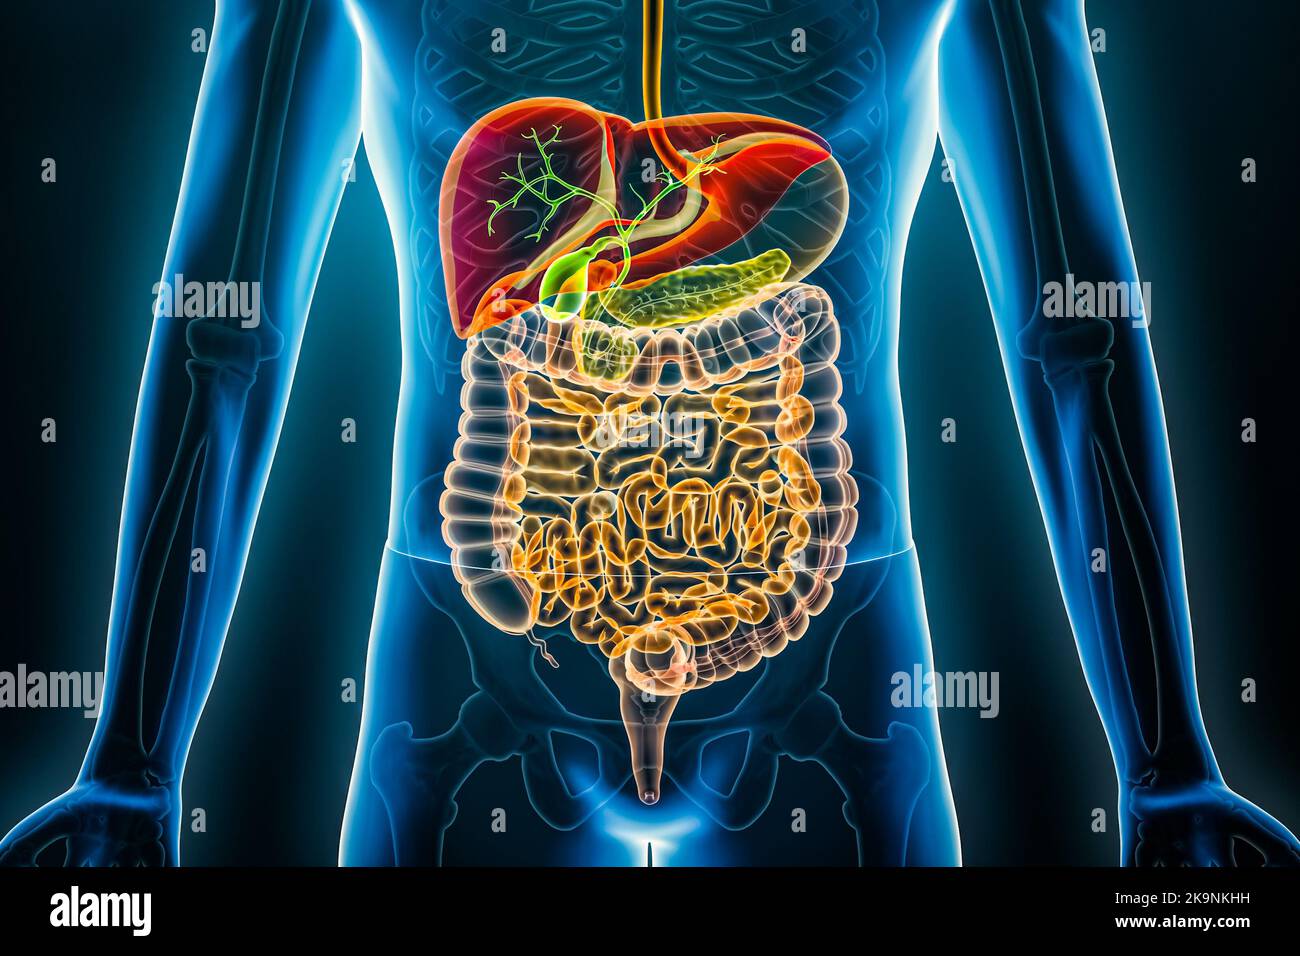 Human digestive system x-ray. Organs of the gastrointestinal tract 3D rendering illustration. Anatomy, medical, biology, science, healthcare concepts. Stock Photo